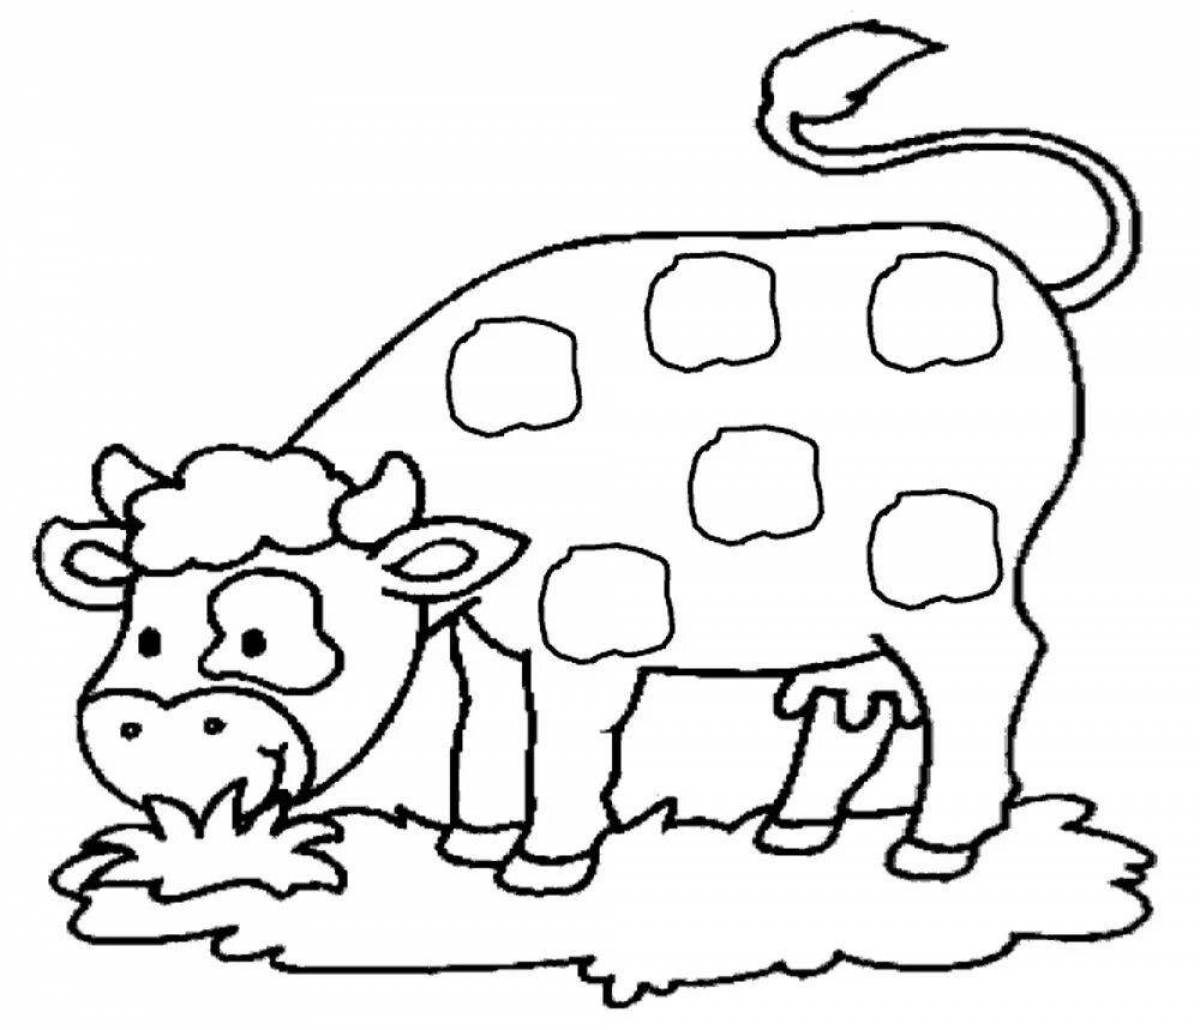 Fun coloring cow for kids